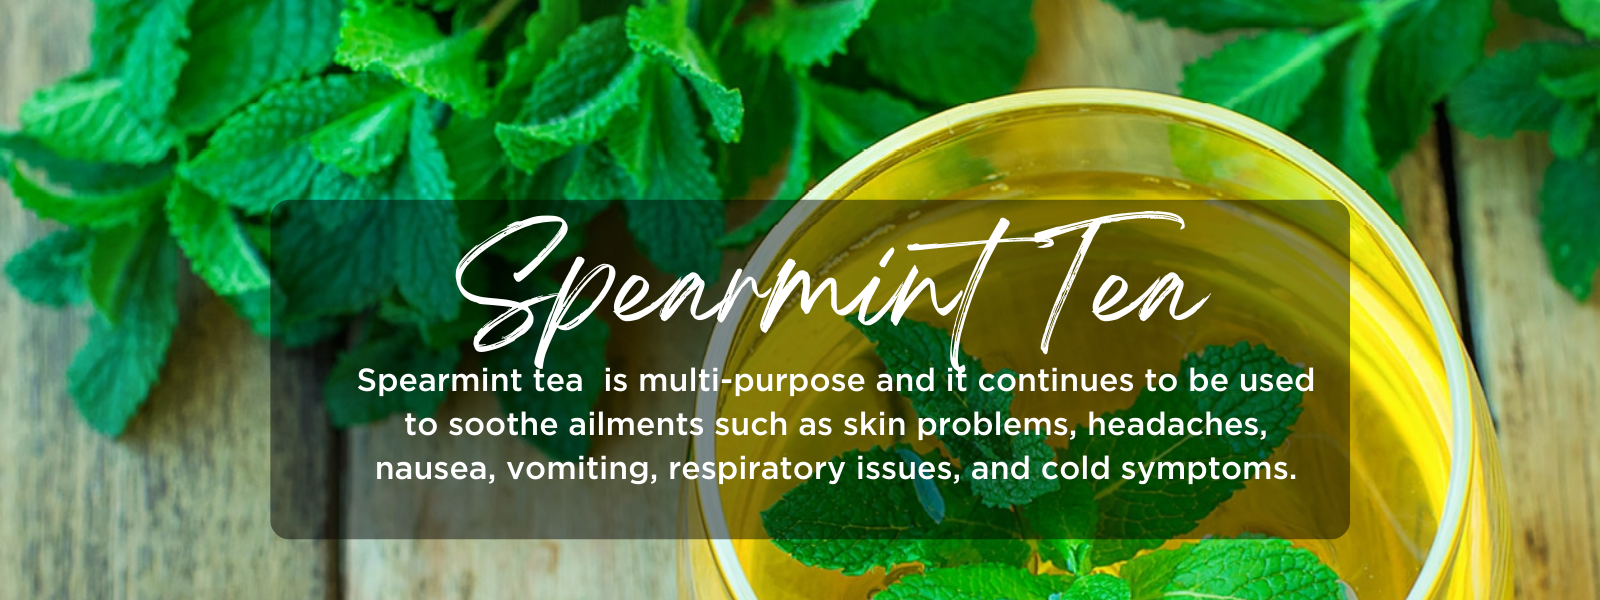 Spearmint tea - Health Benefits, Uses and Important Facts